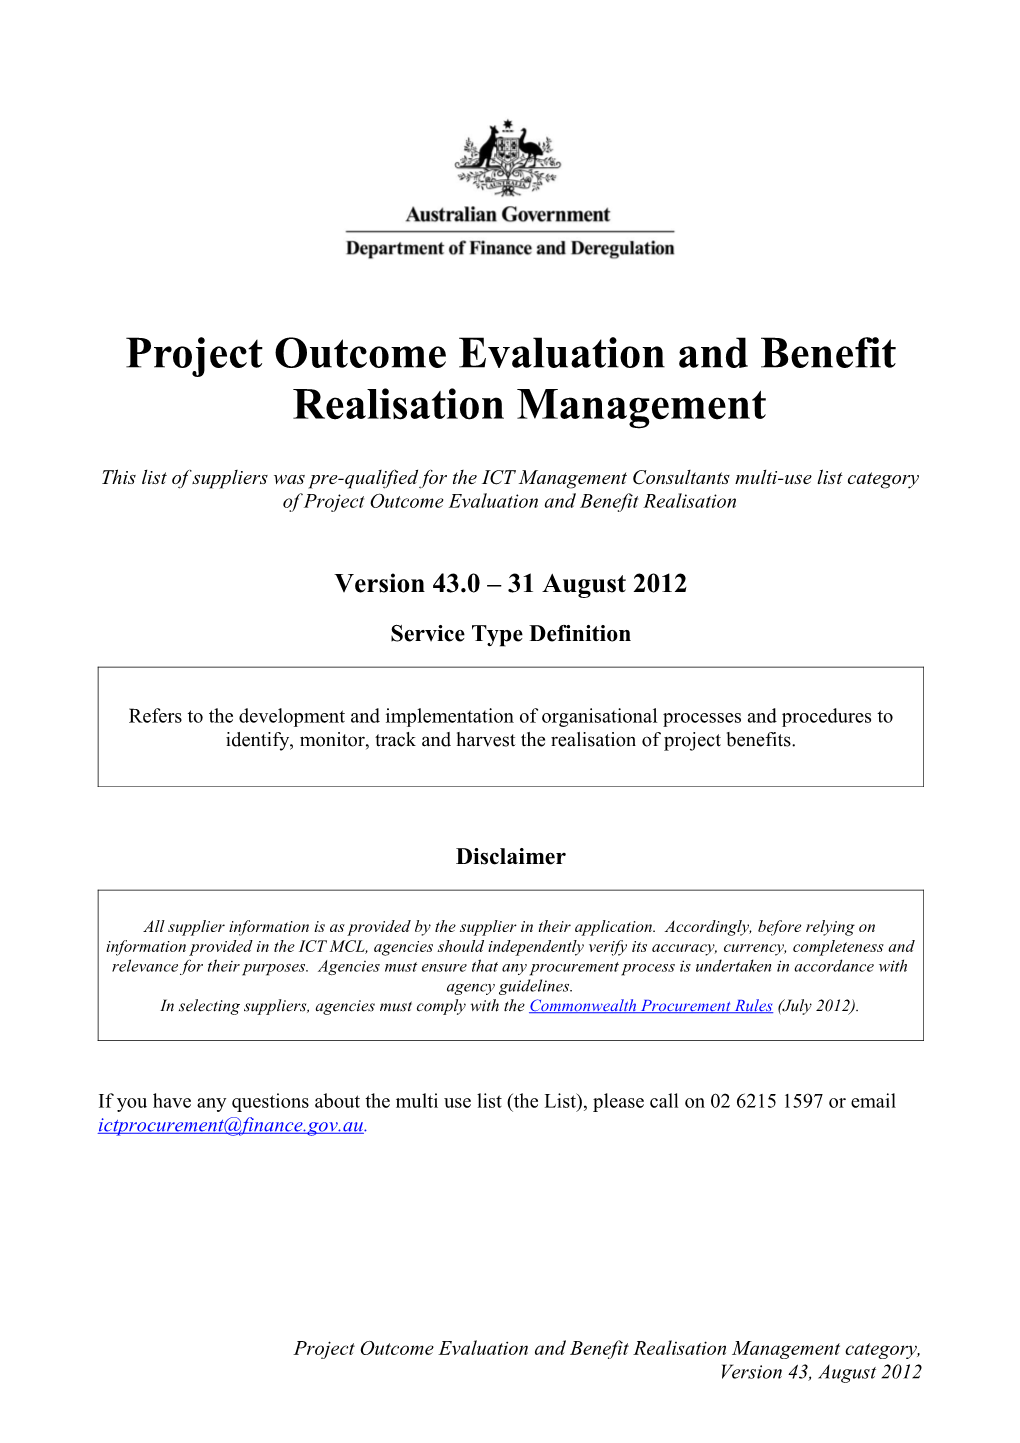 Management Consultants Multi Use List Suppliers of Project Outcome Evaluation and Benefit